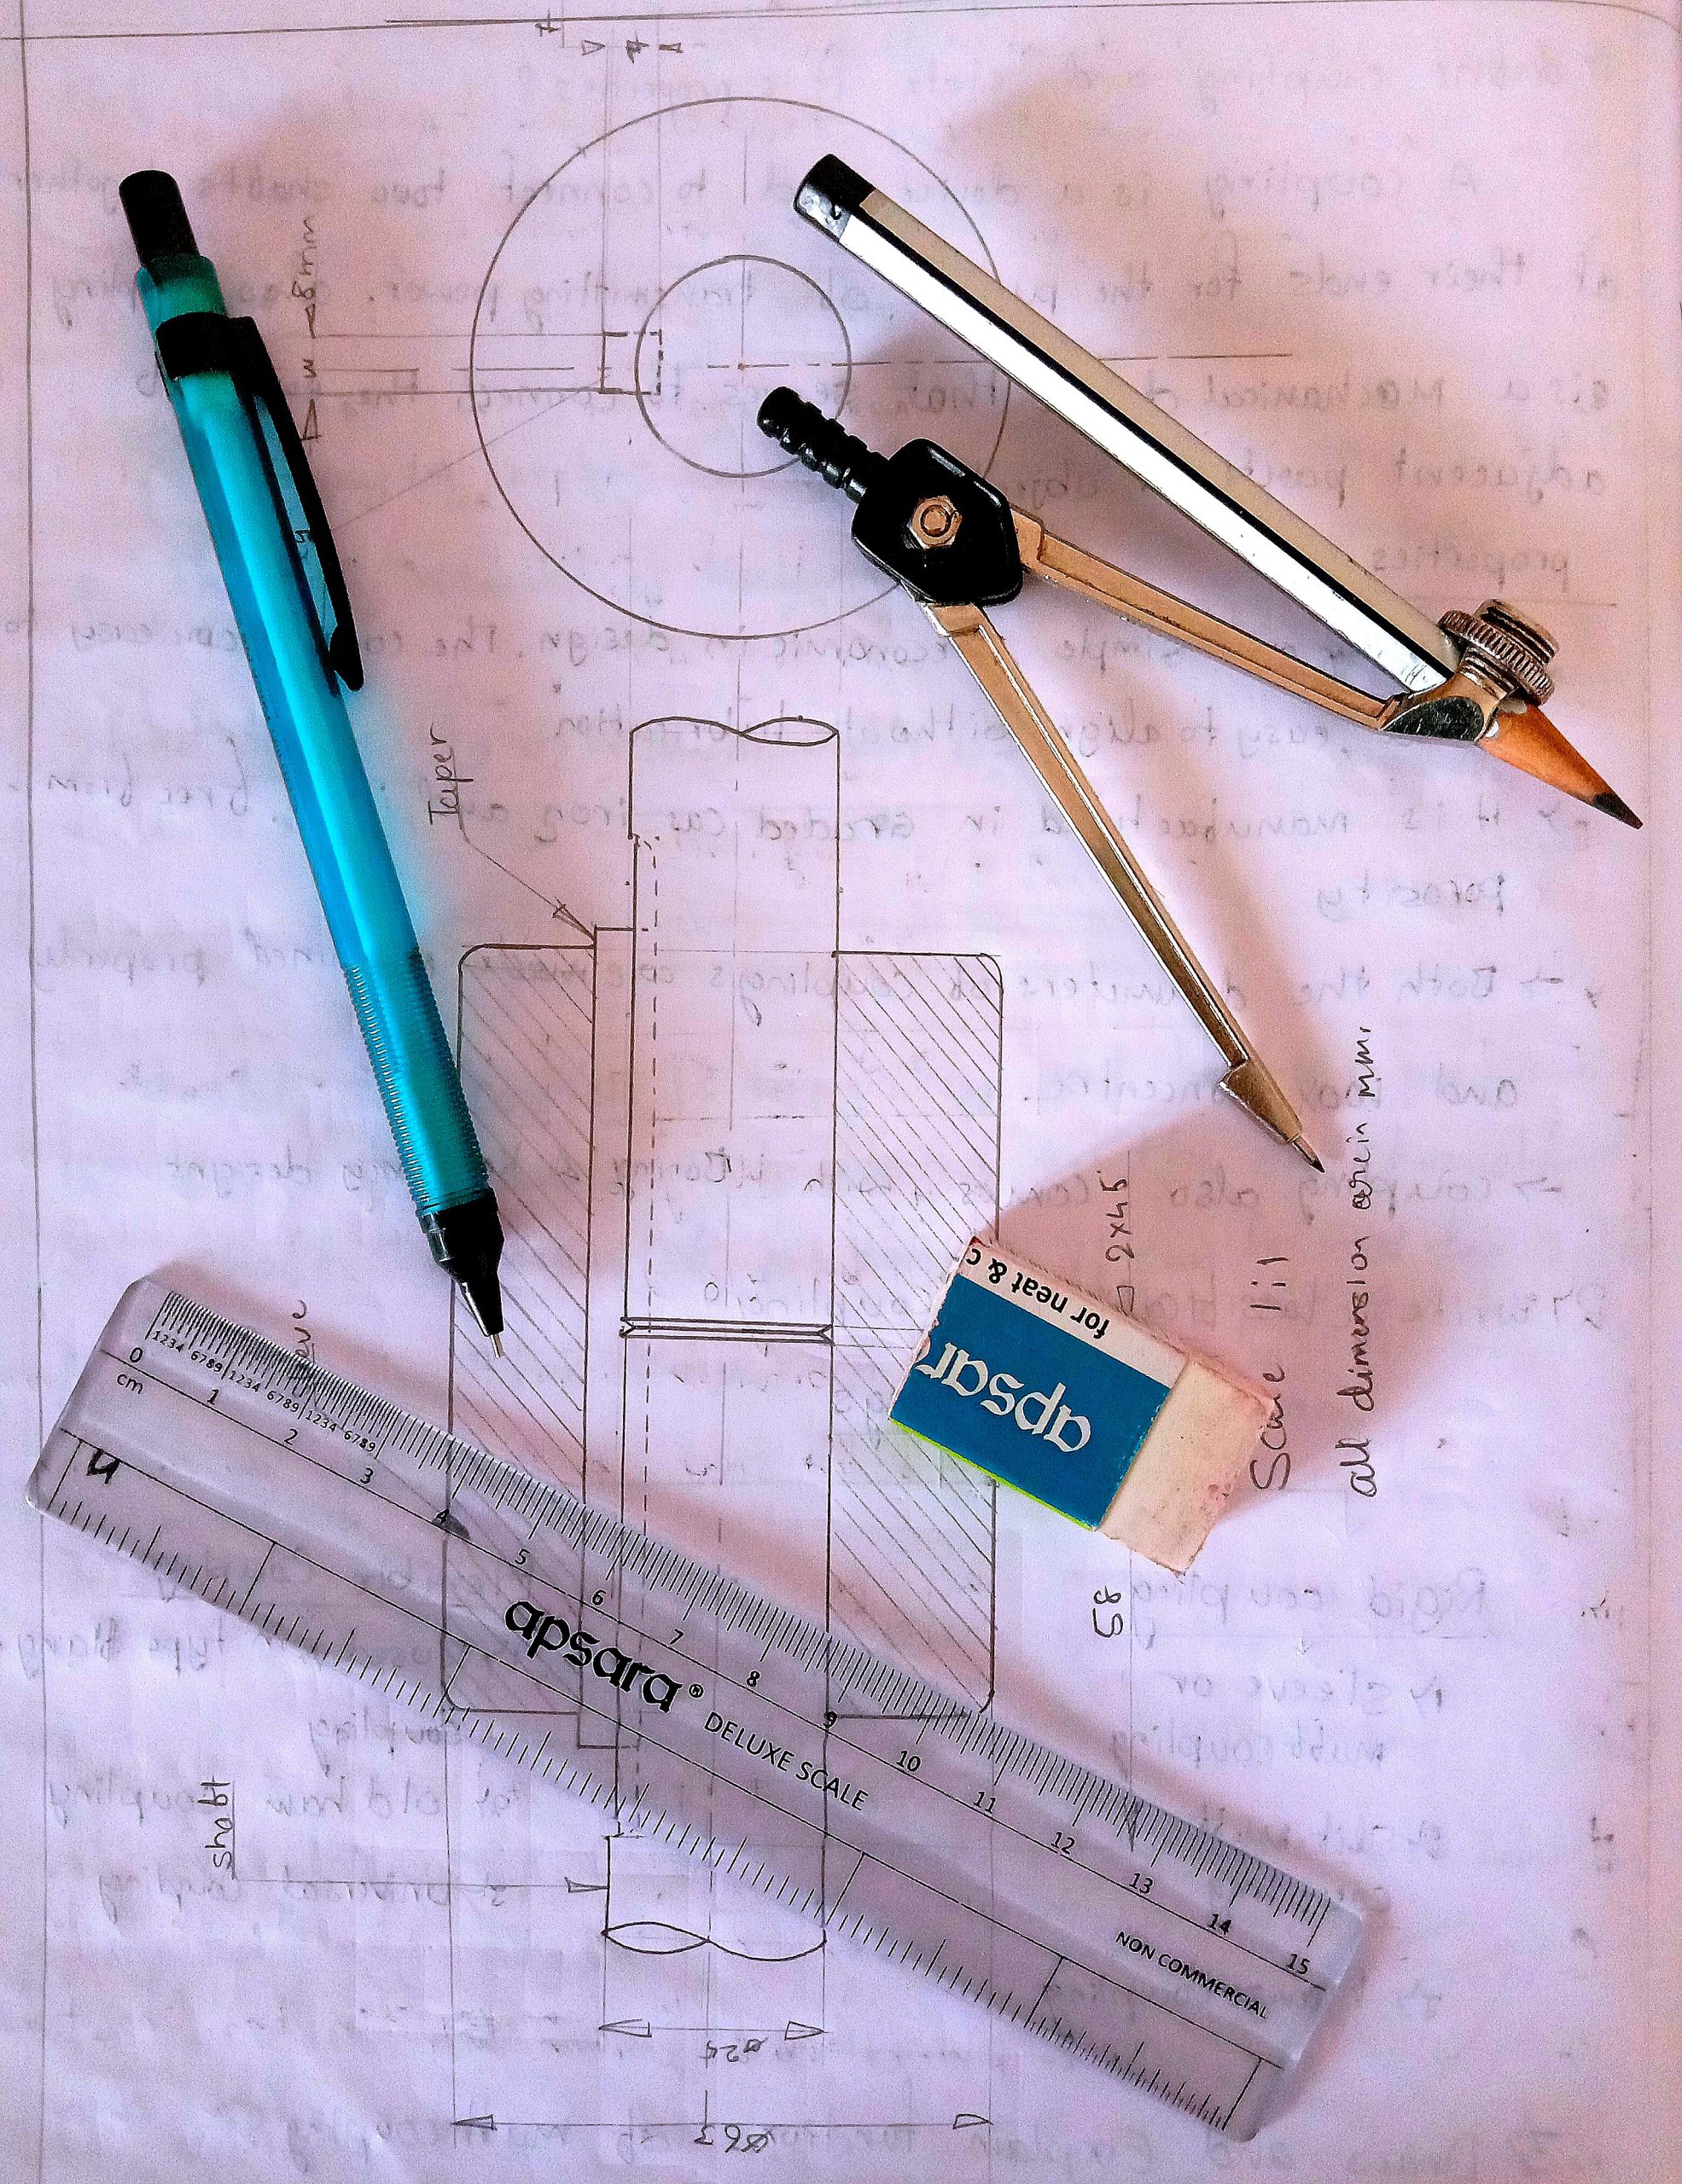 Geometry tools and drawing